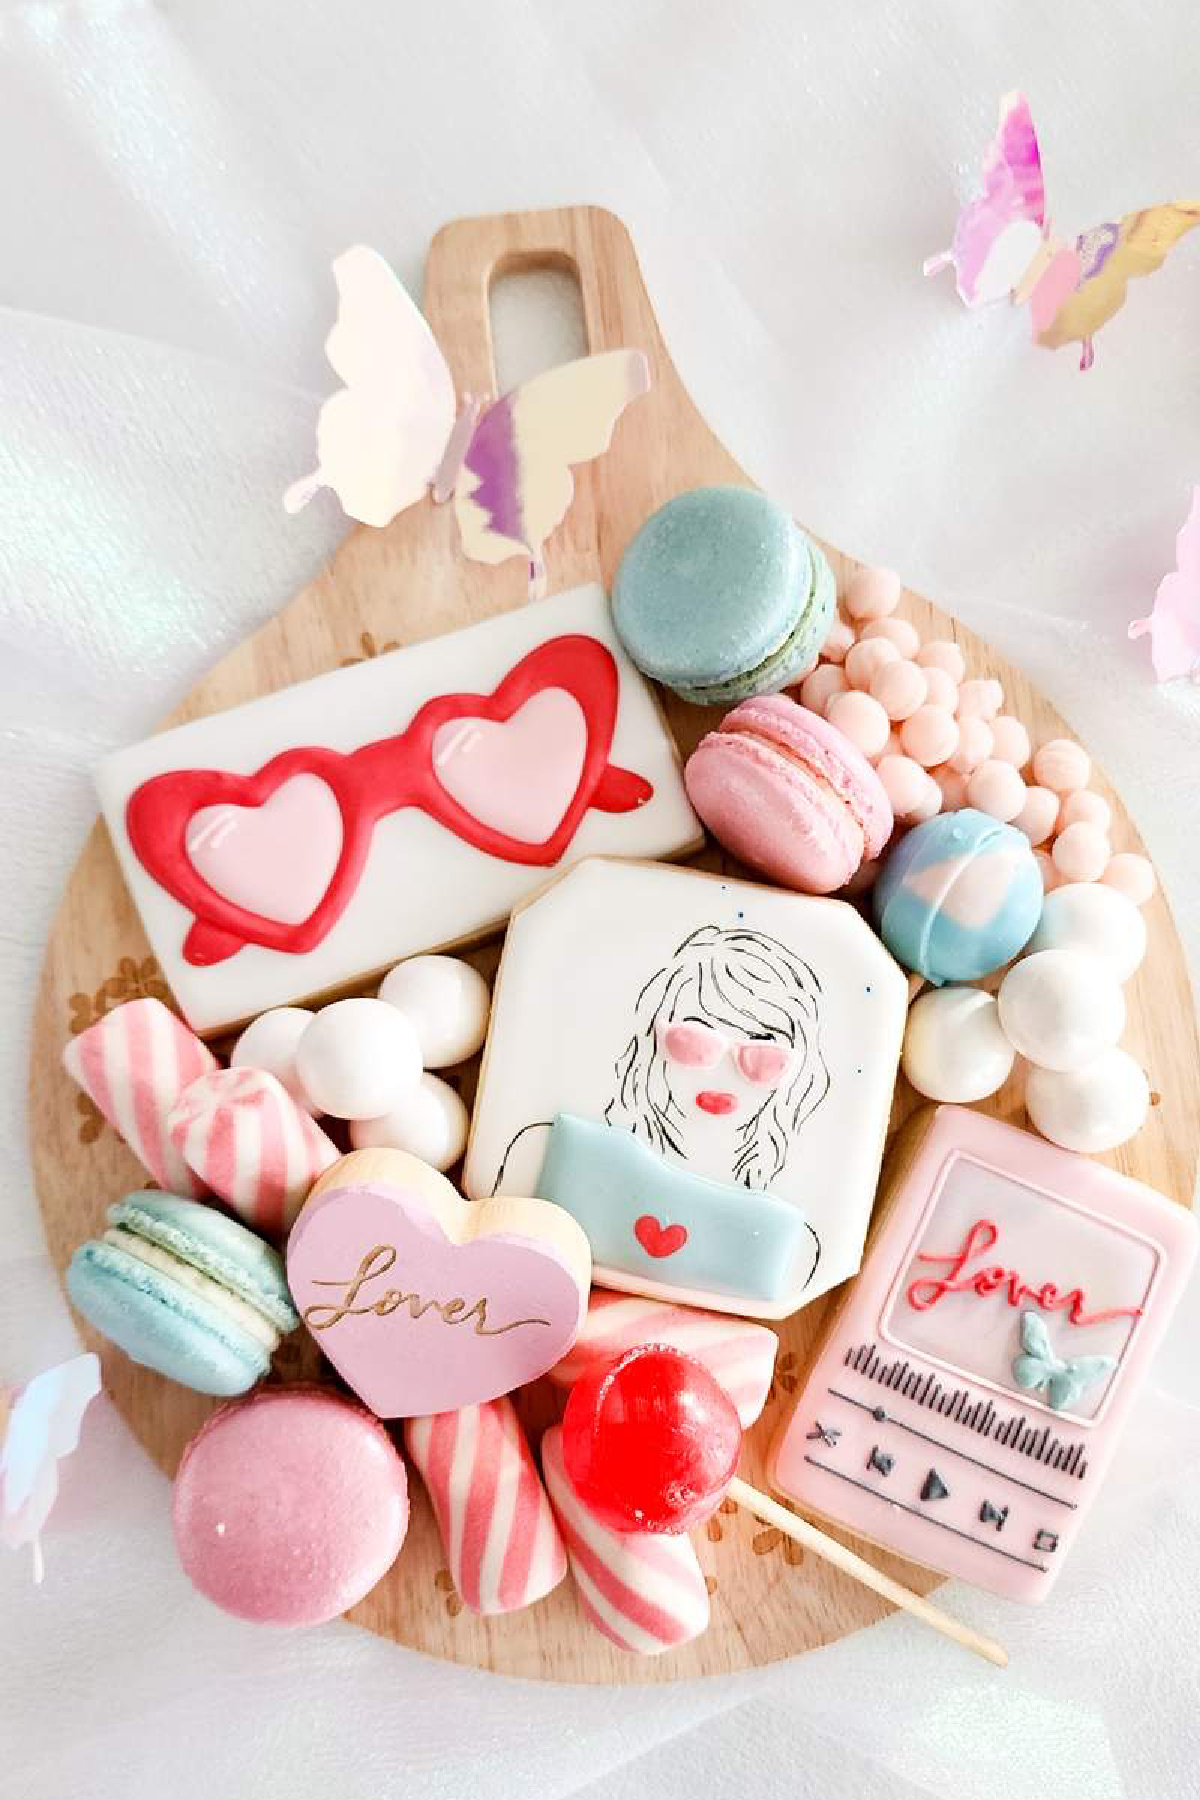 Lover-Inspired Cookies